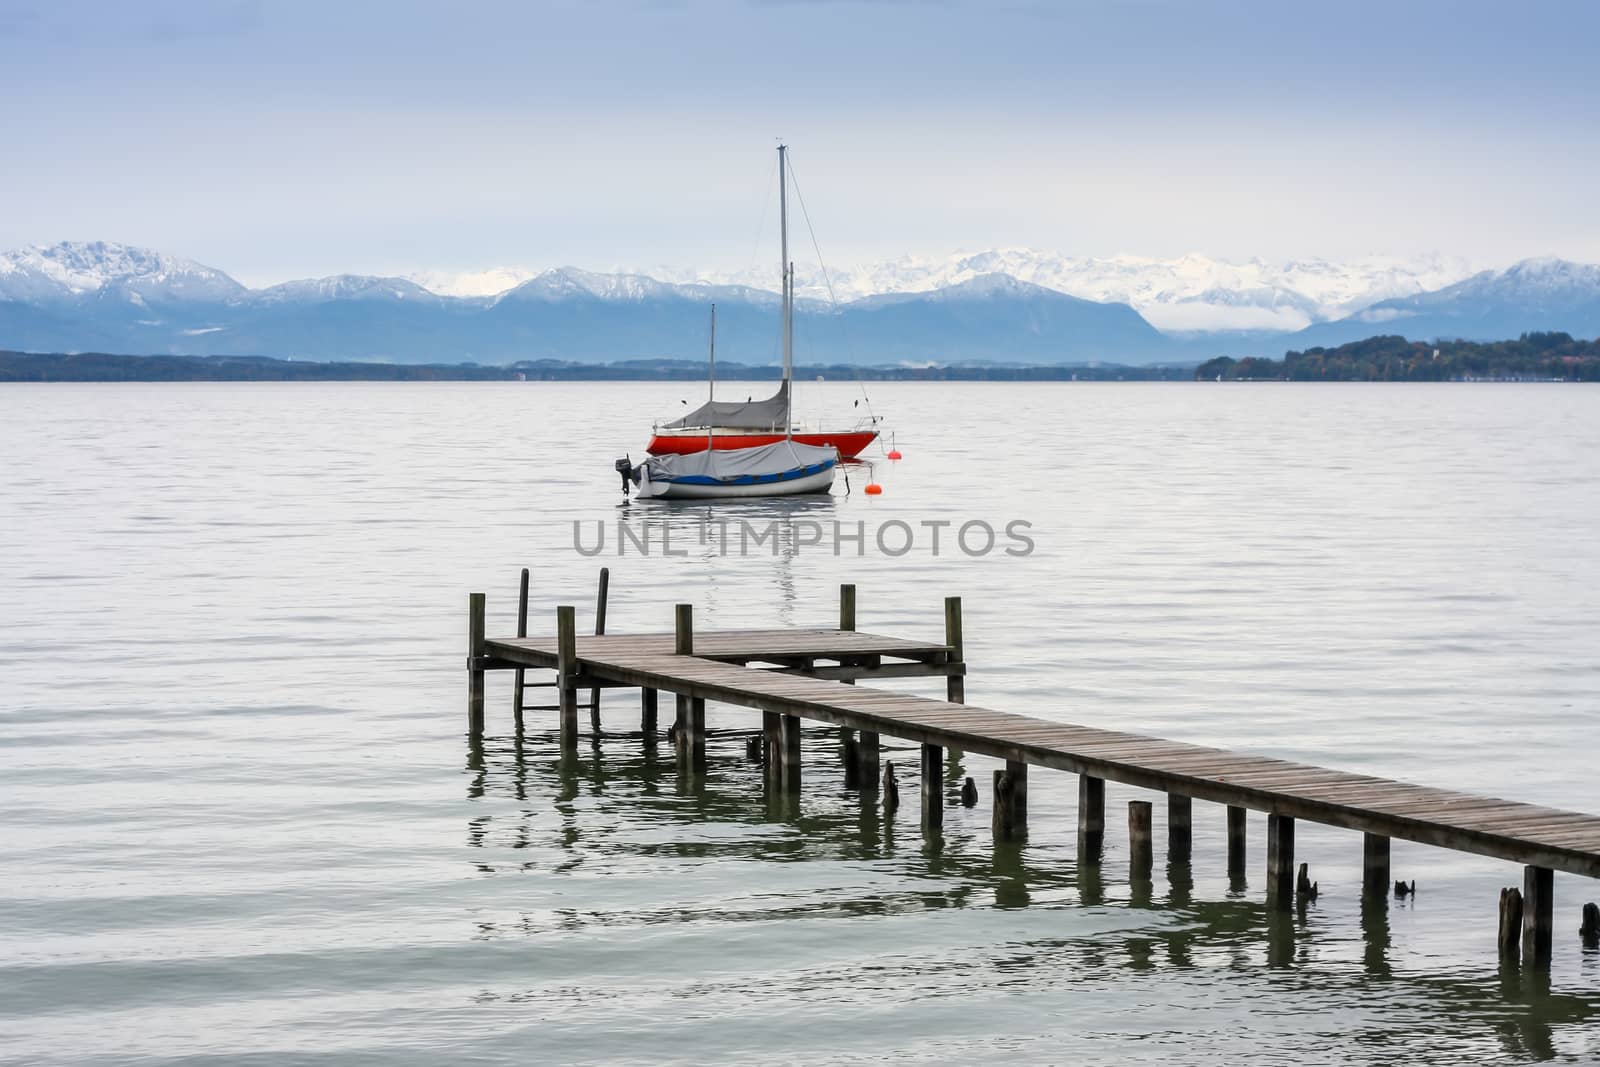 An image of Starnberg lake jetty and boats Alps in winter season